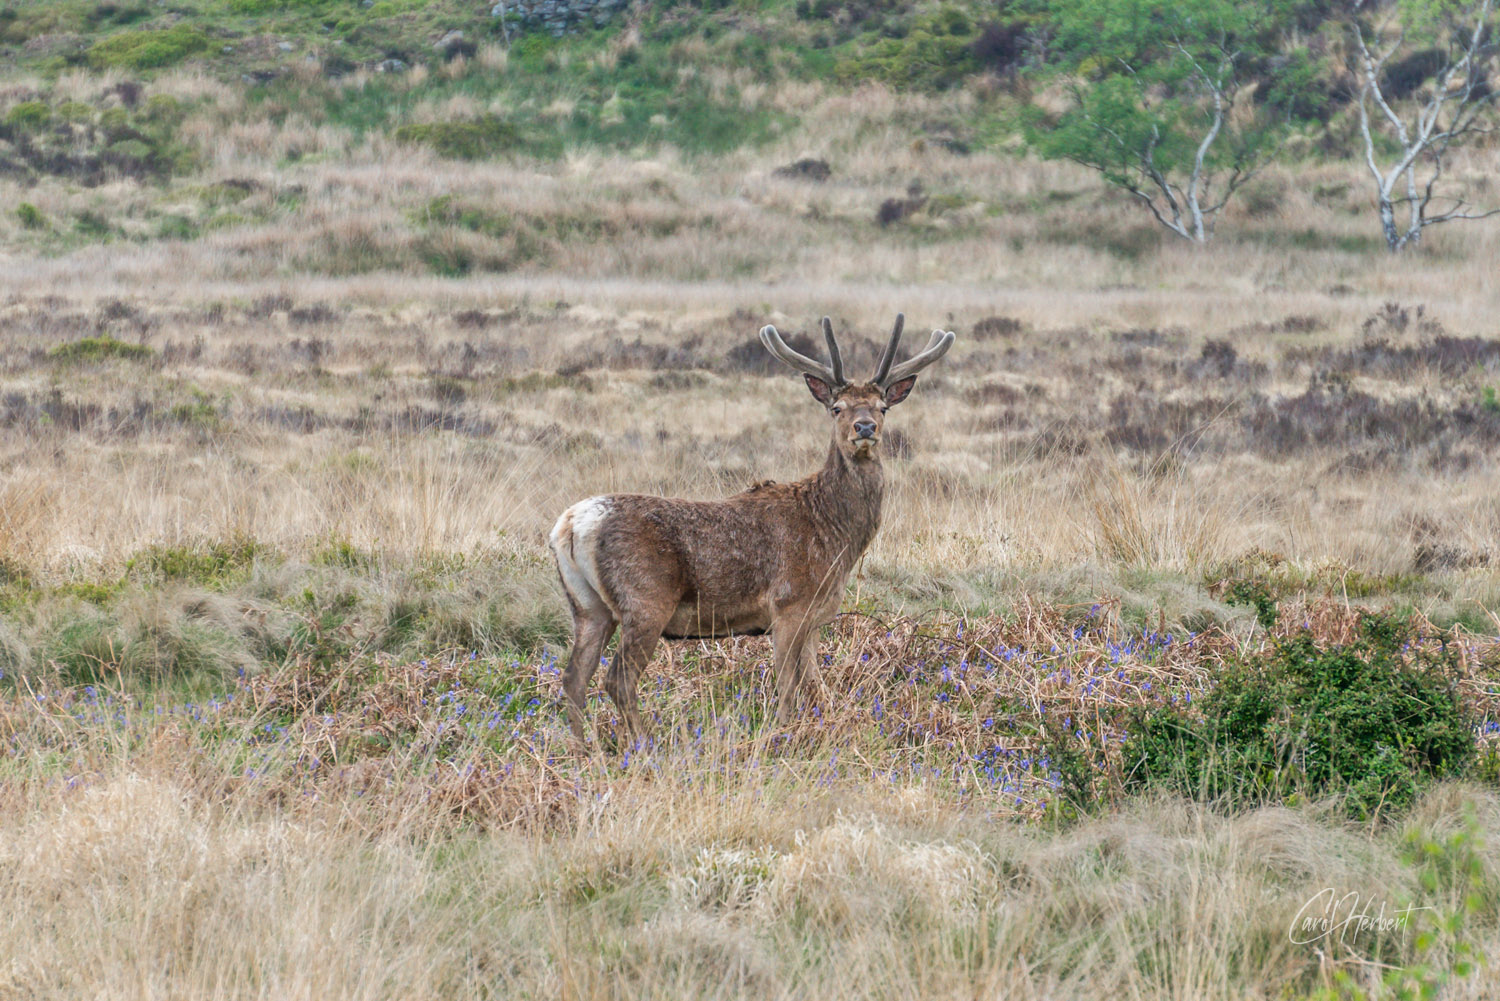 Photograph of a wild deer stag